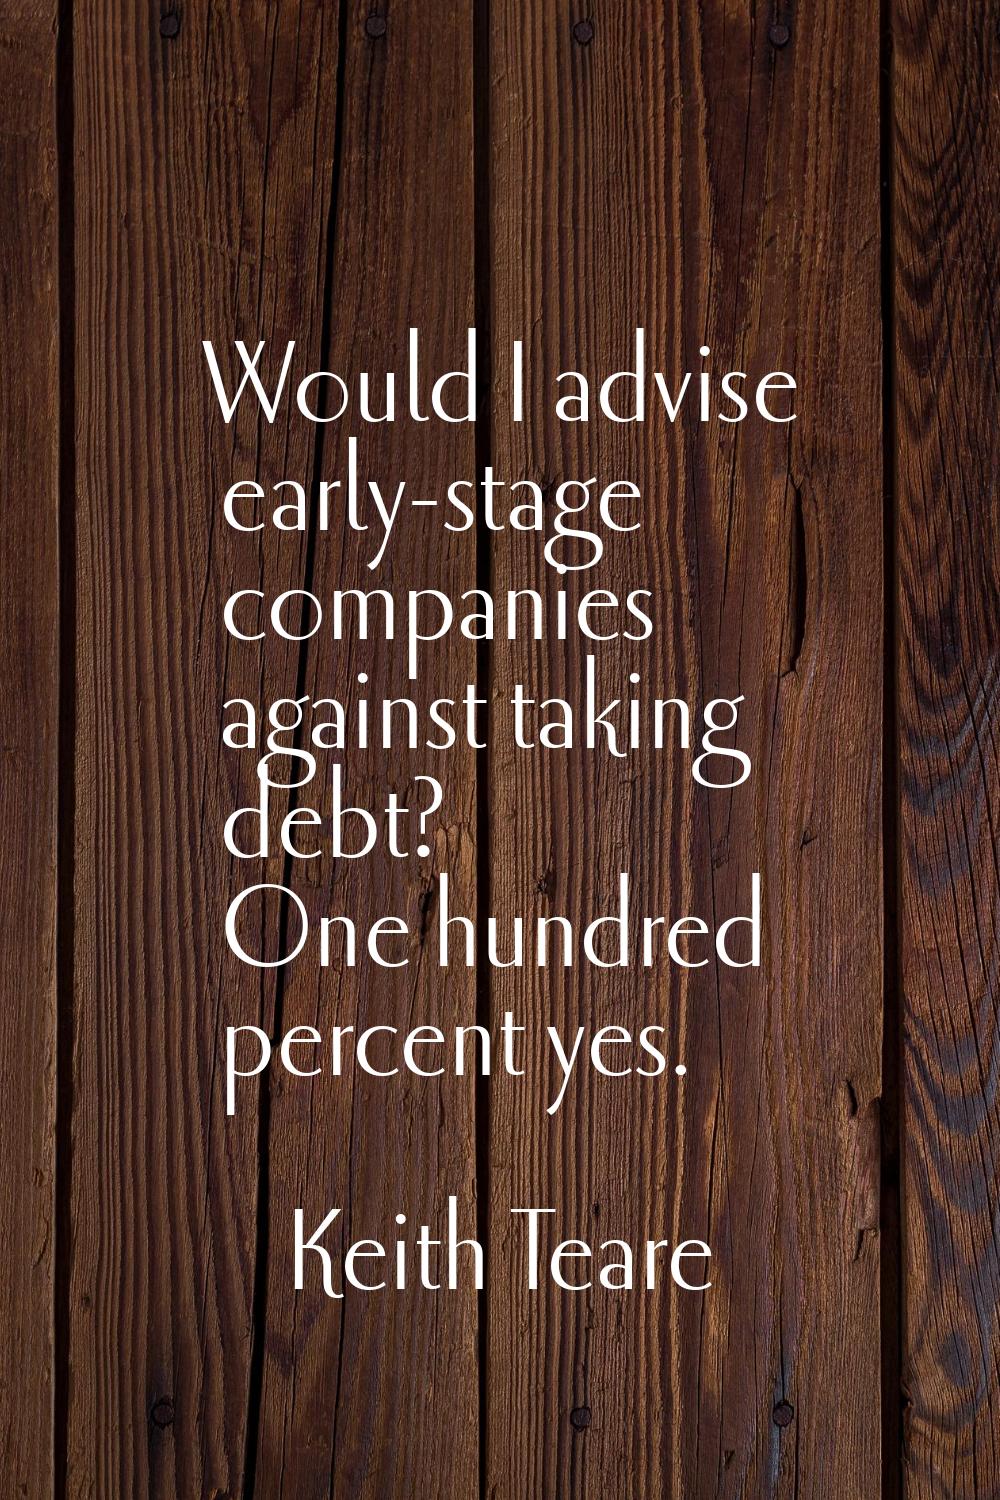 Would I advise early-stage companies against taking debt? One hundred percent yes.